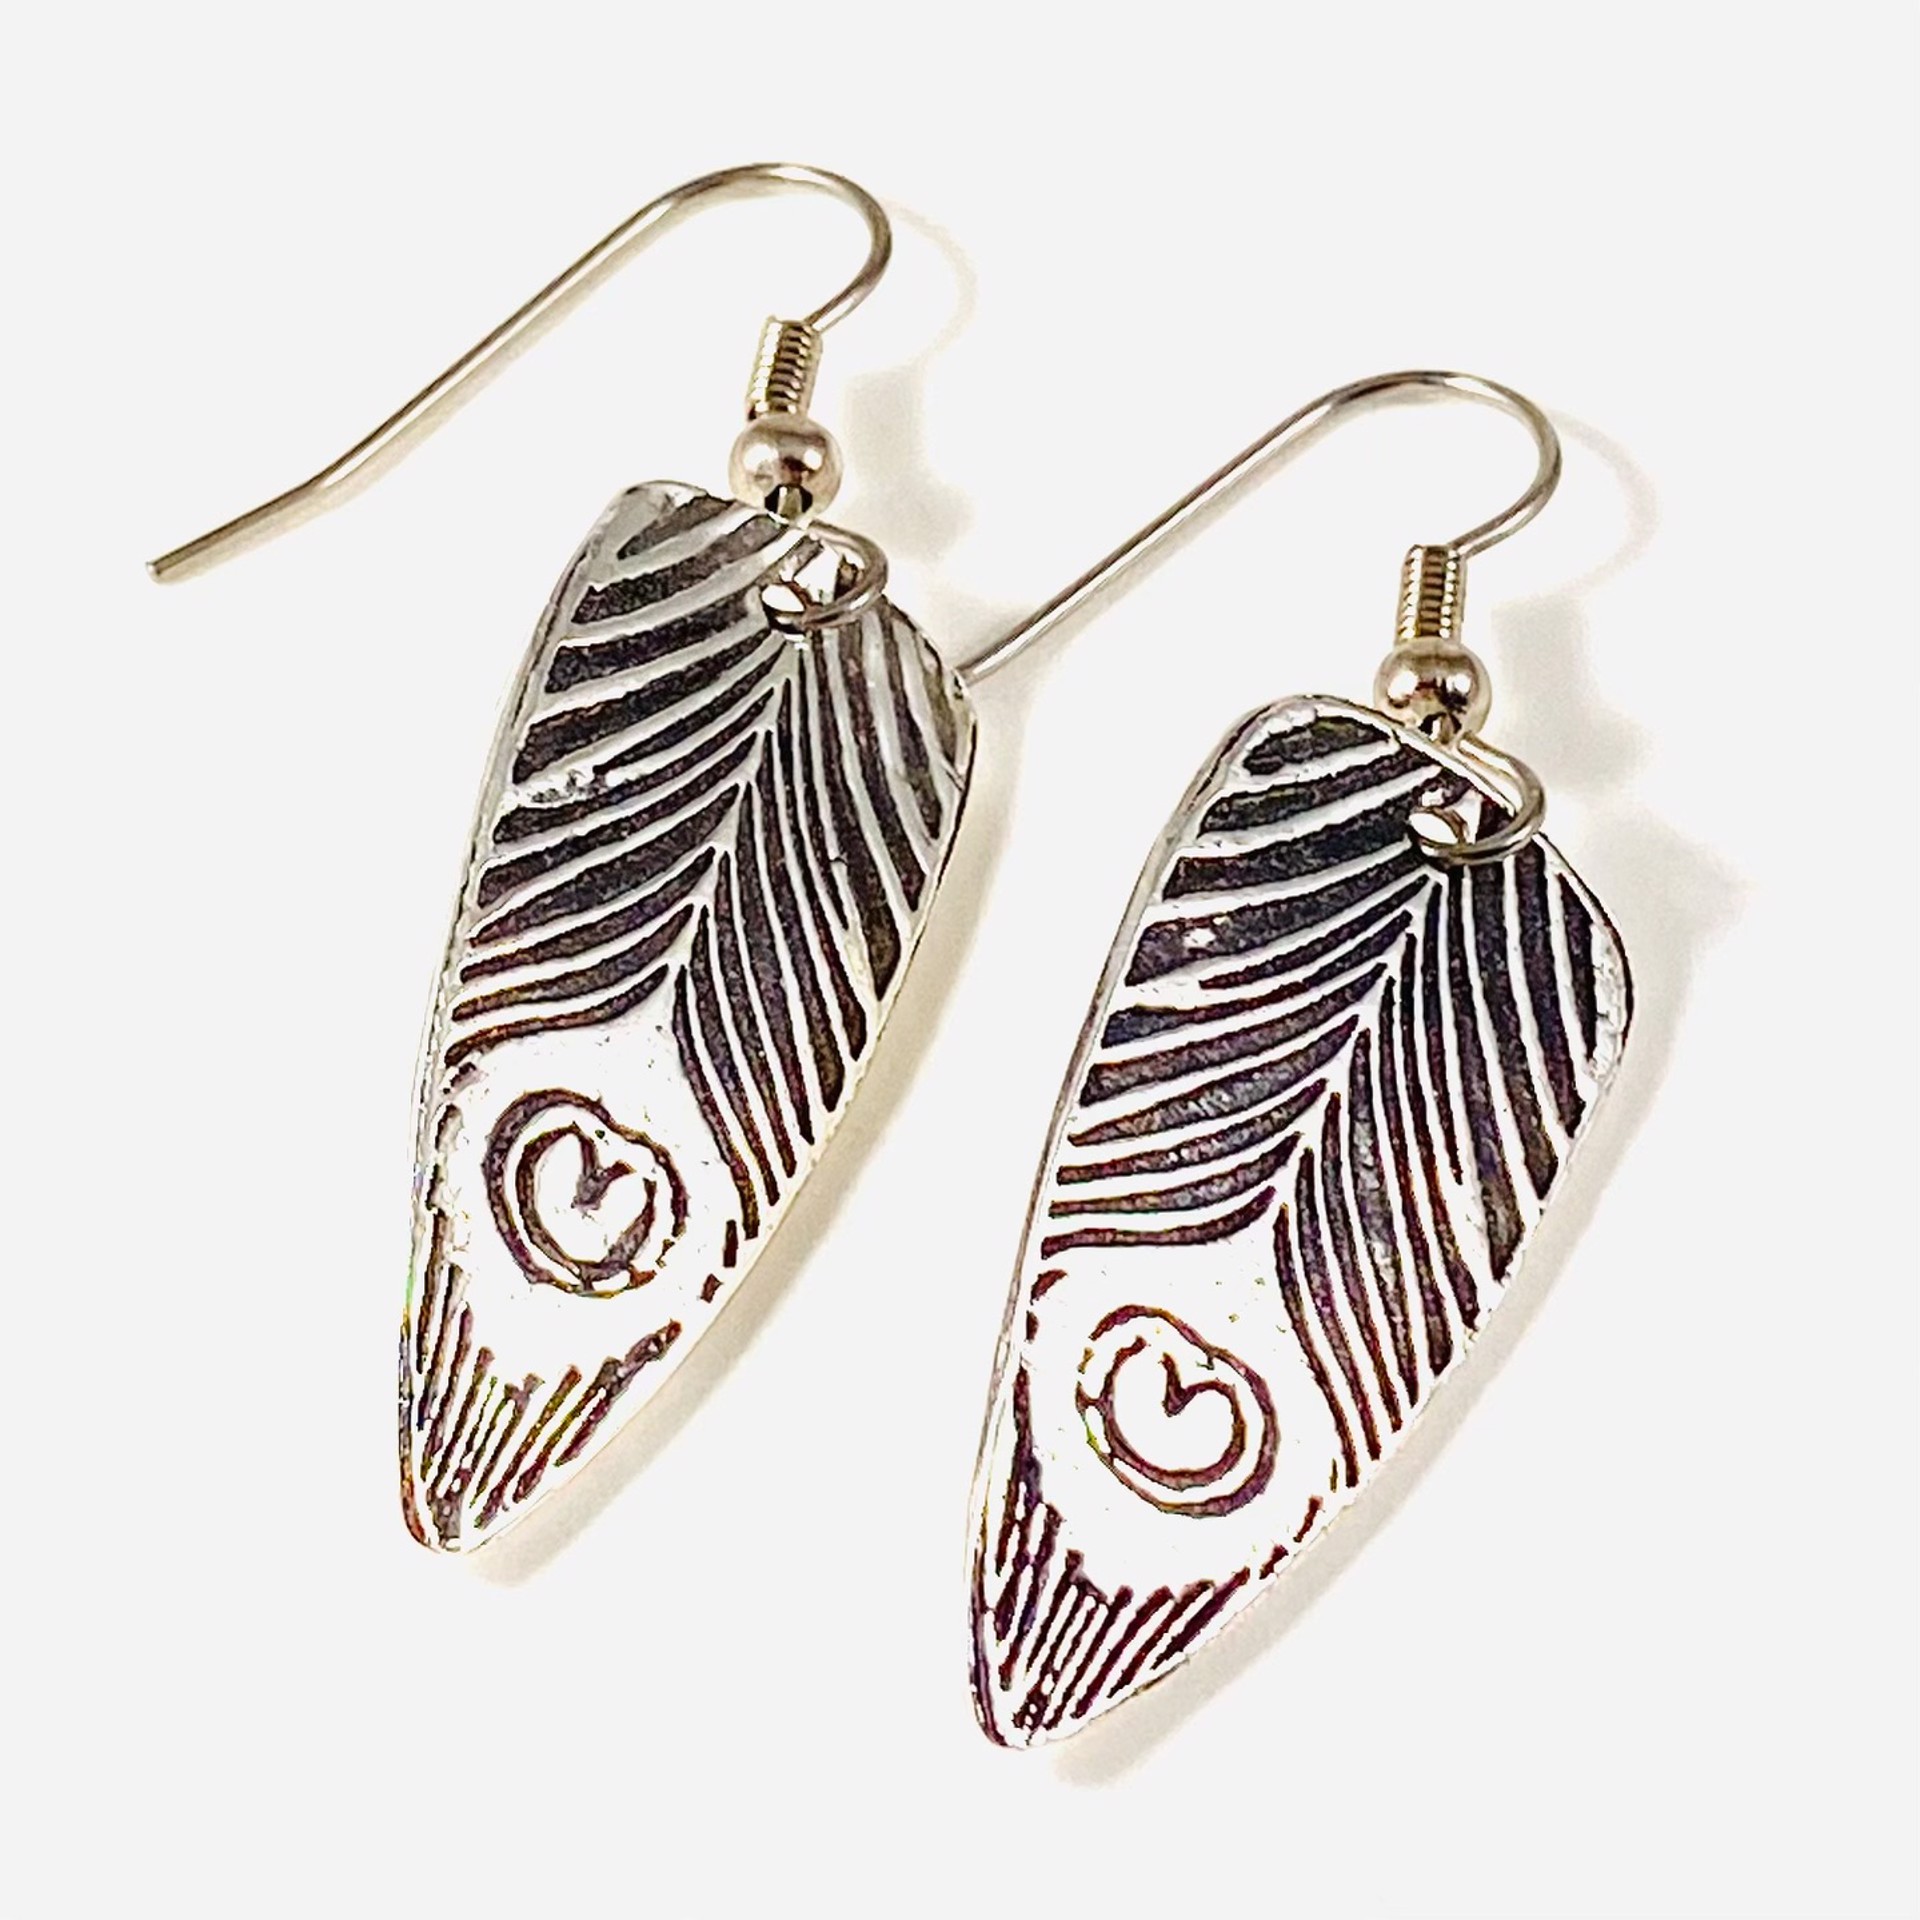 KH21-i Oxidized Peacock Feather Earrings by Karen Hakim